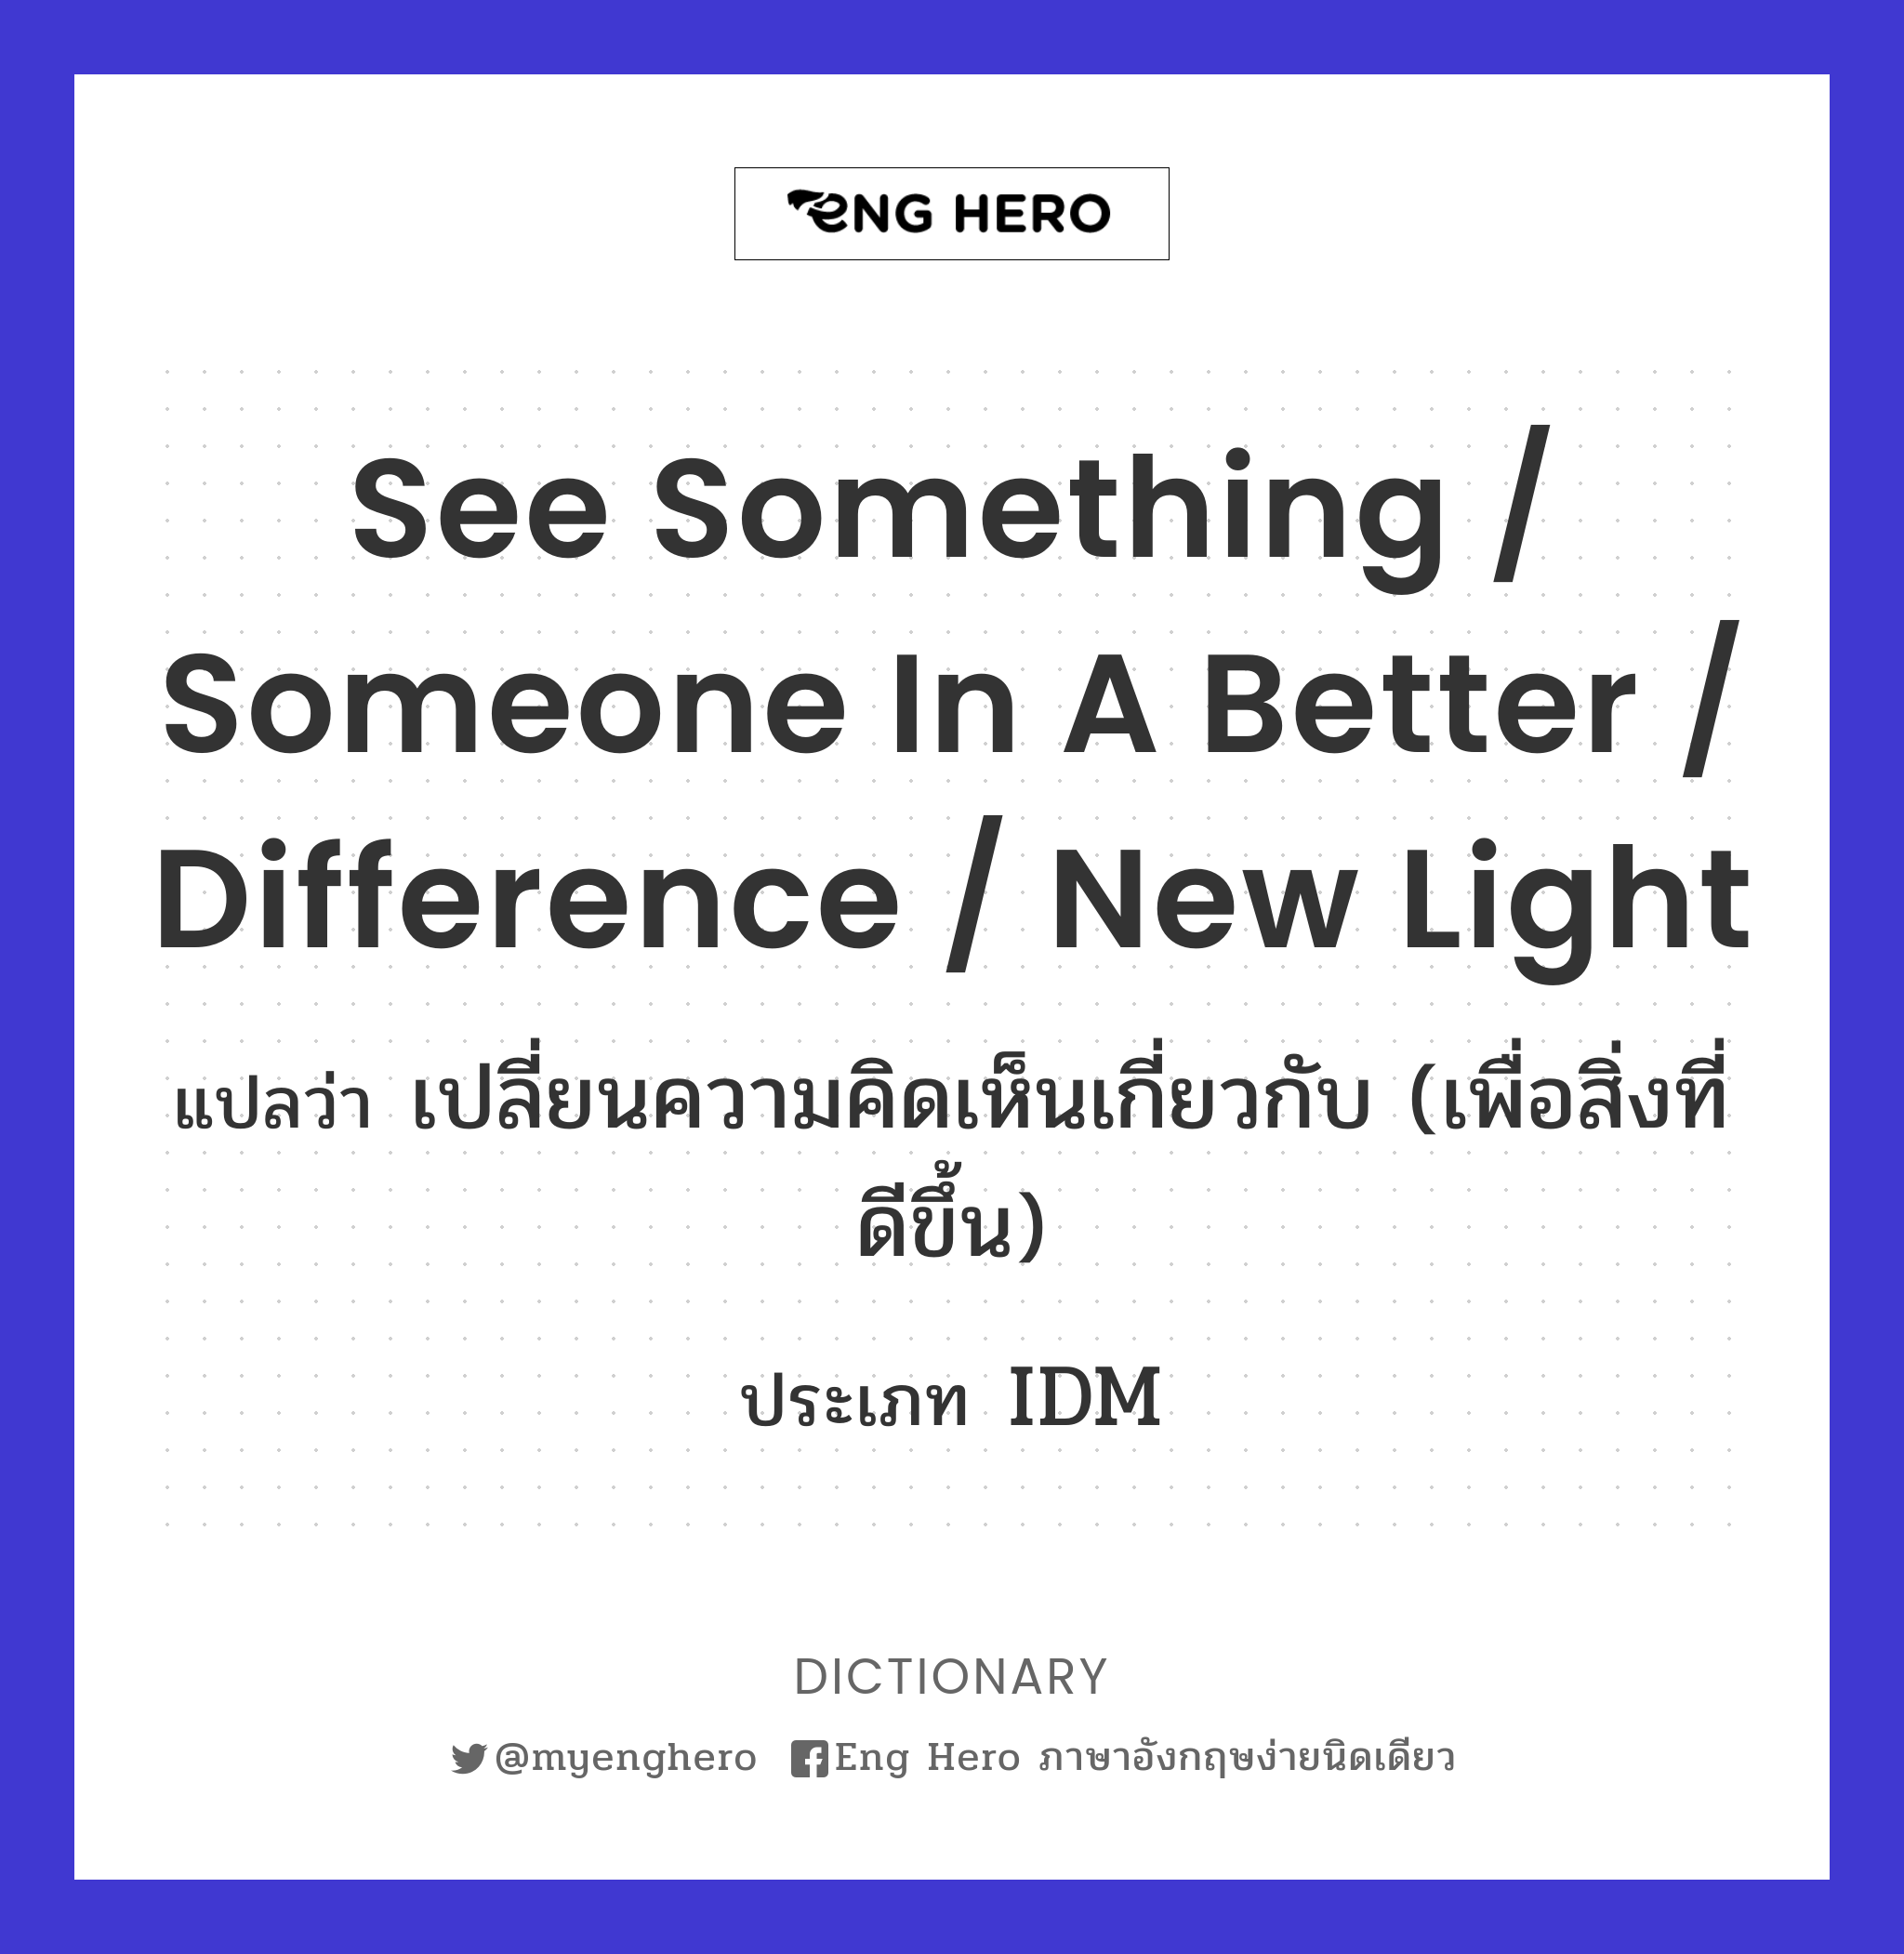 see something / someone in a better / difference / new light